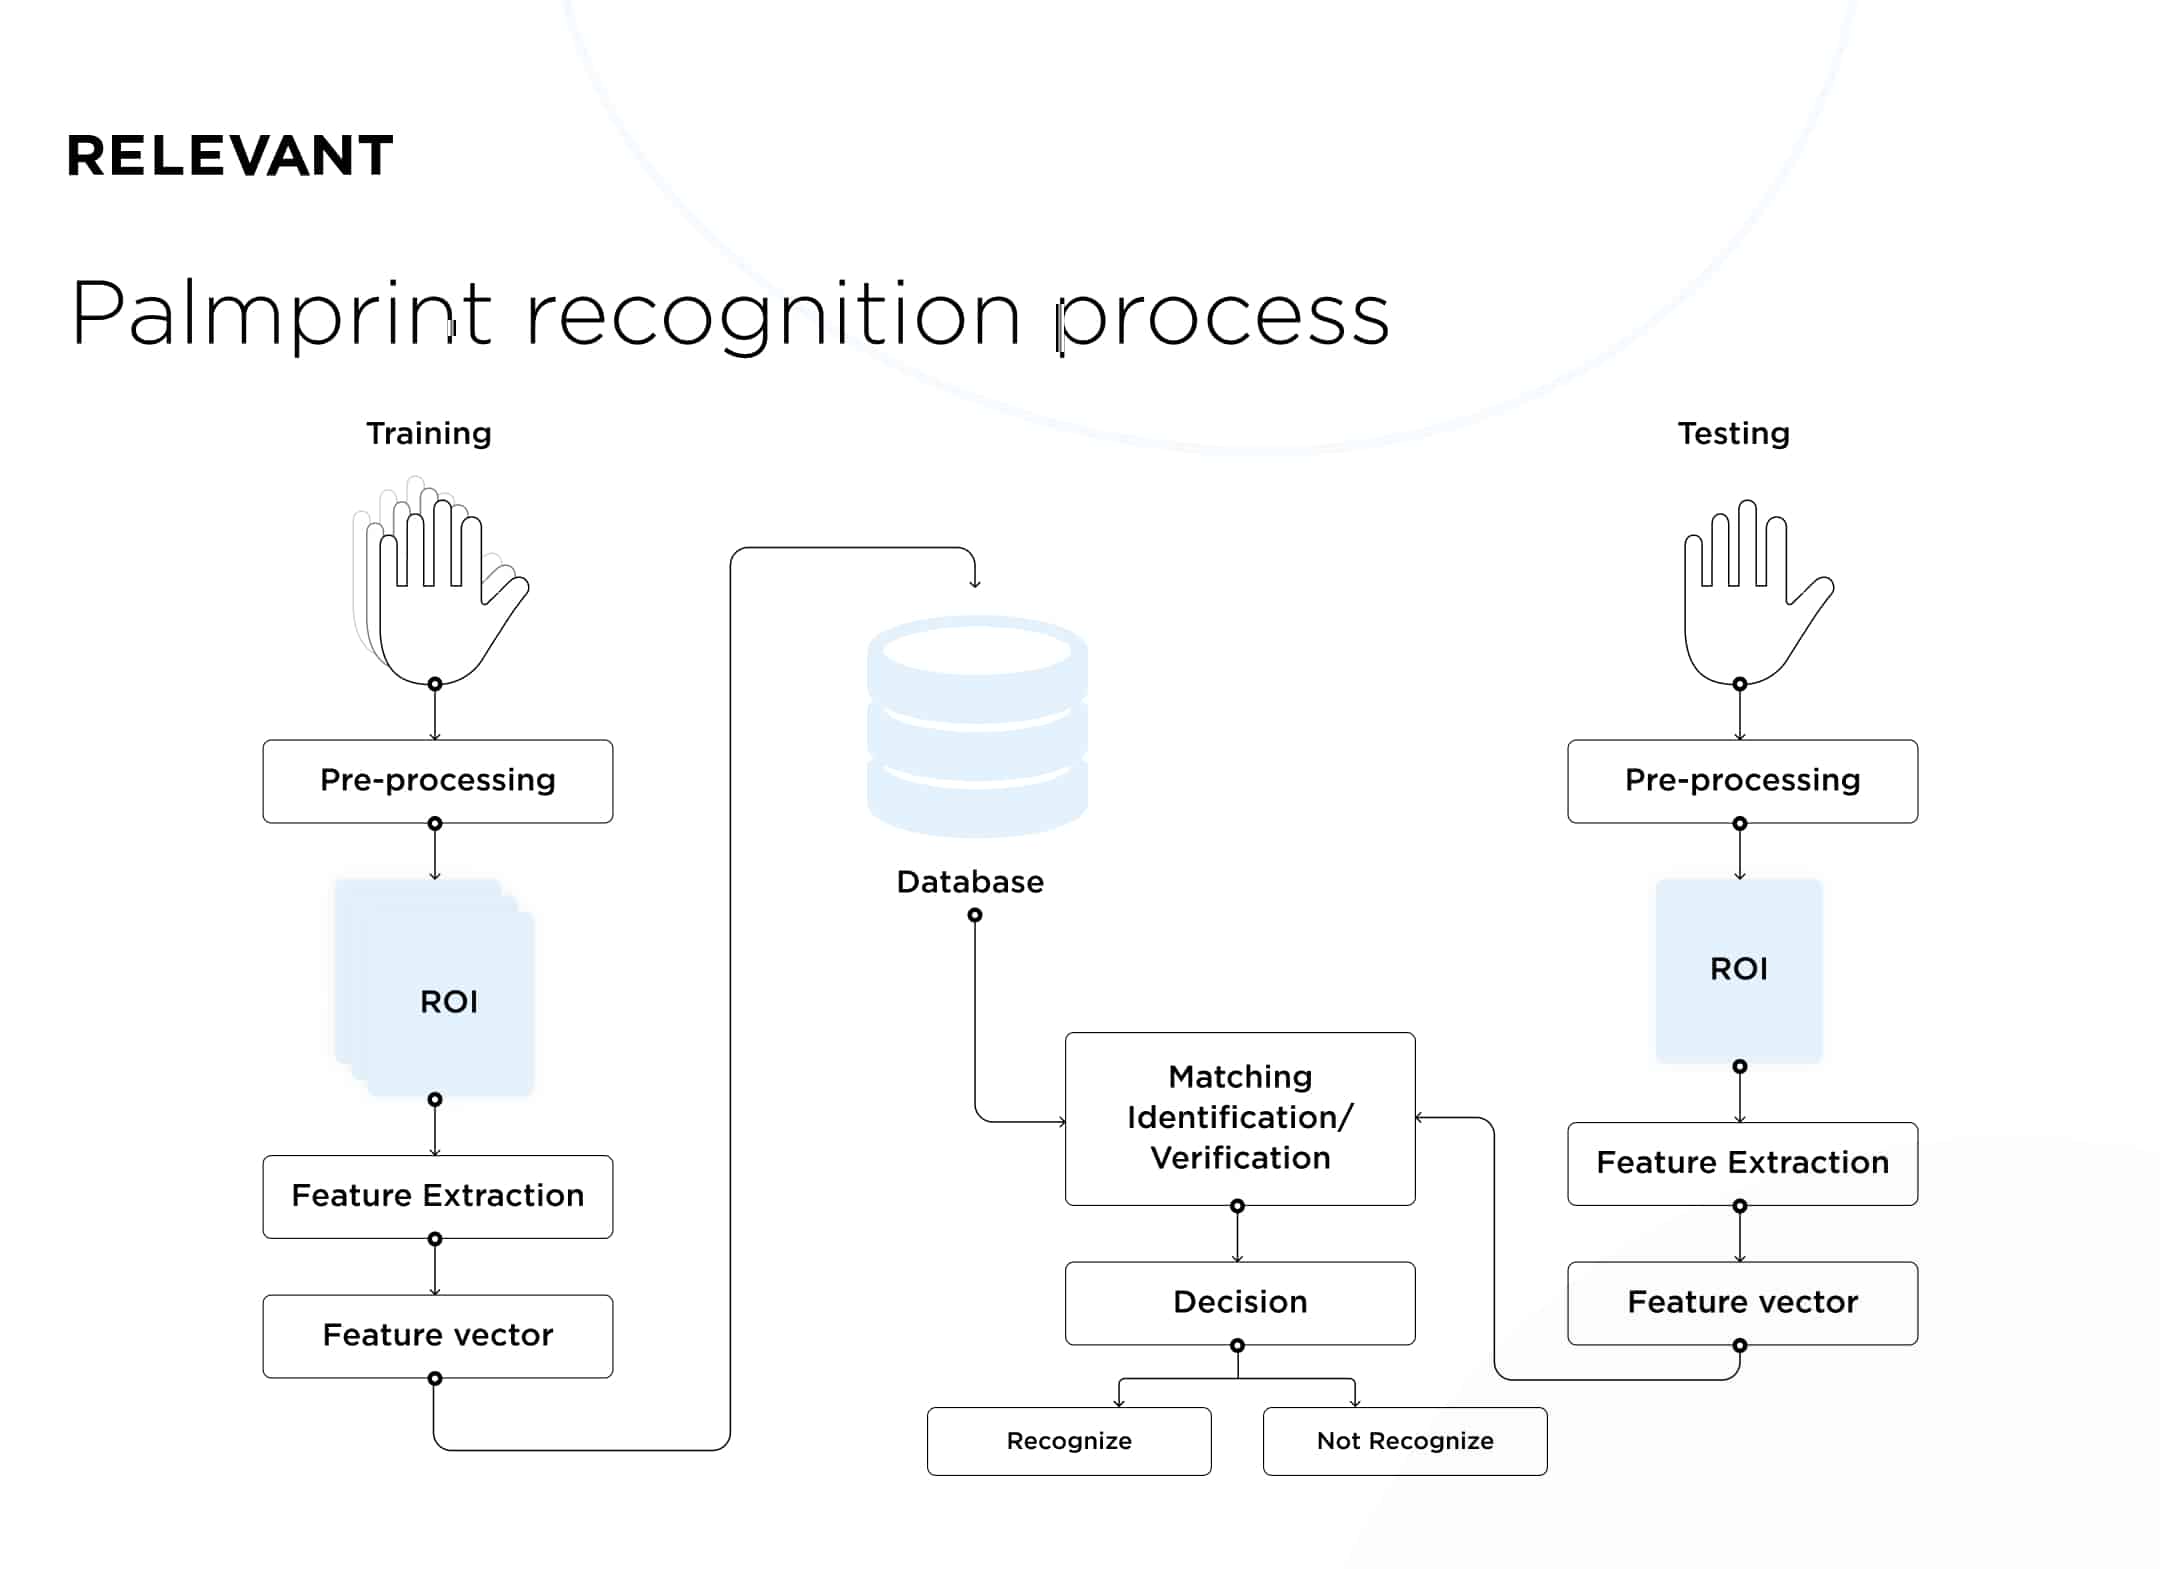 the process of palmprint recognition